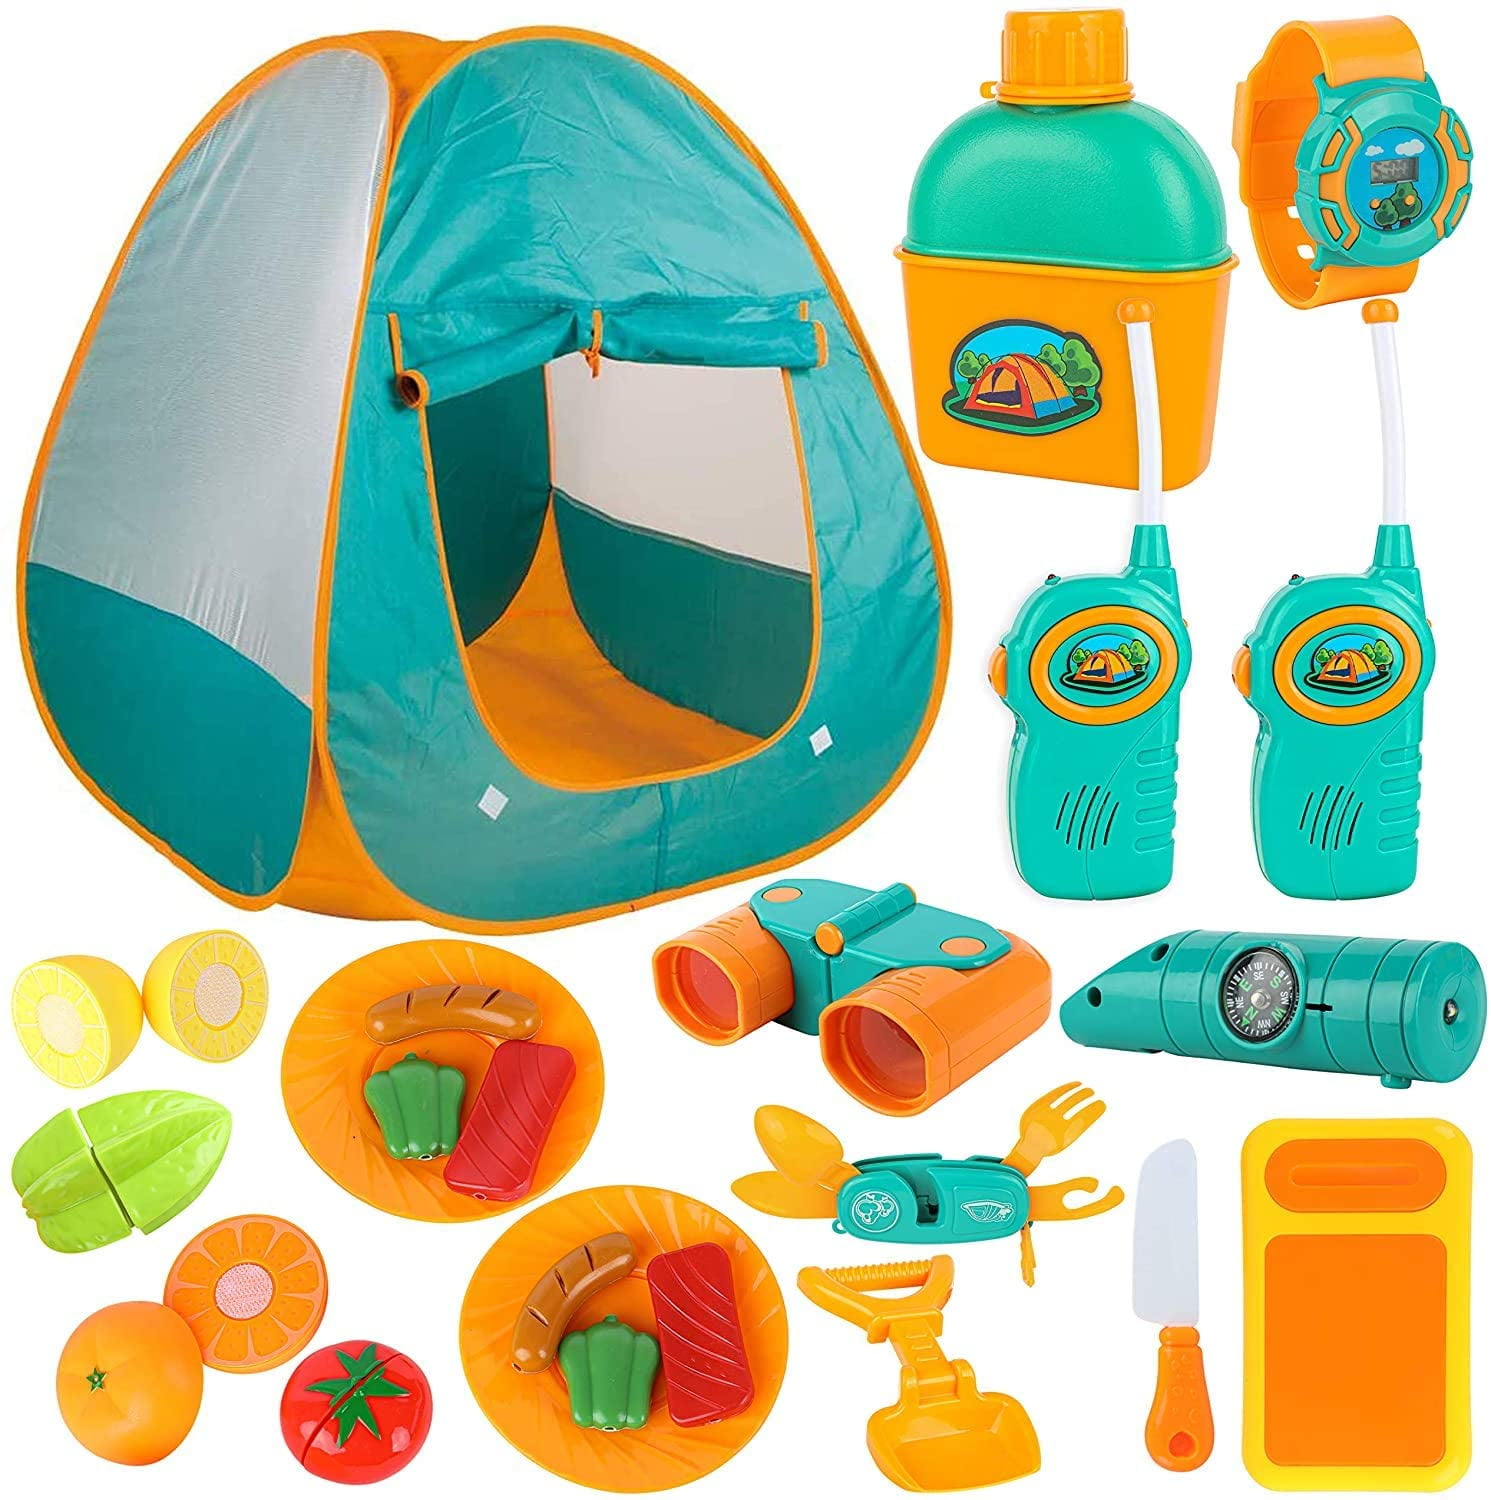 Yexmas Kids Camping Set with Tent 26pcs - Outdoor Campfire Toy Set for  Toddlers Kids Boys Girls - Pretend Play Camp Gear Tools